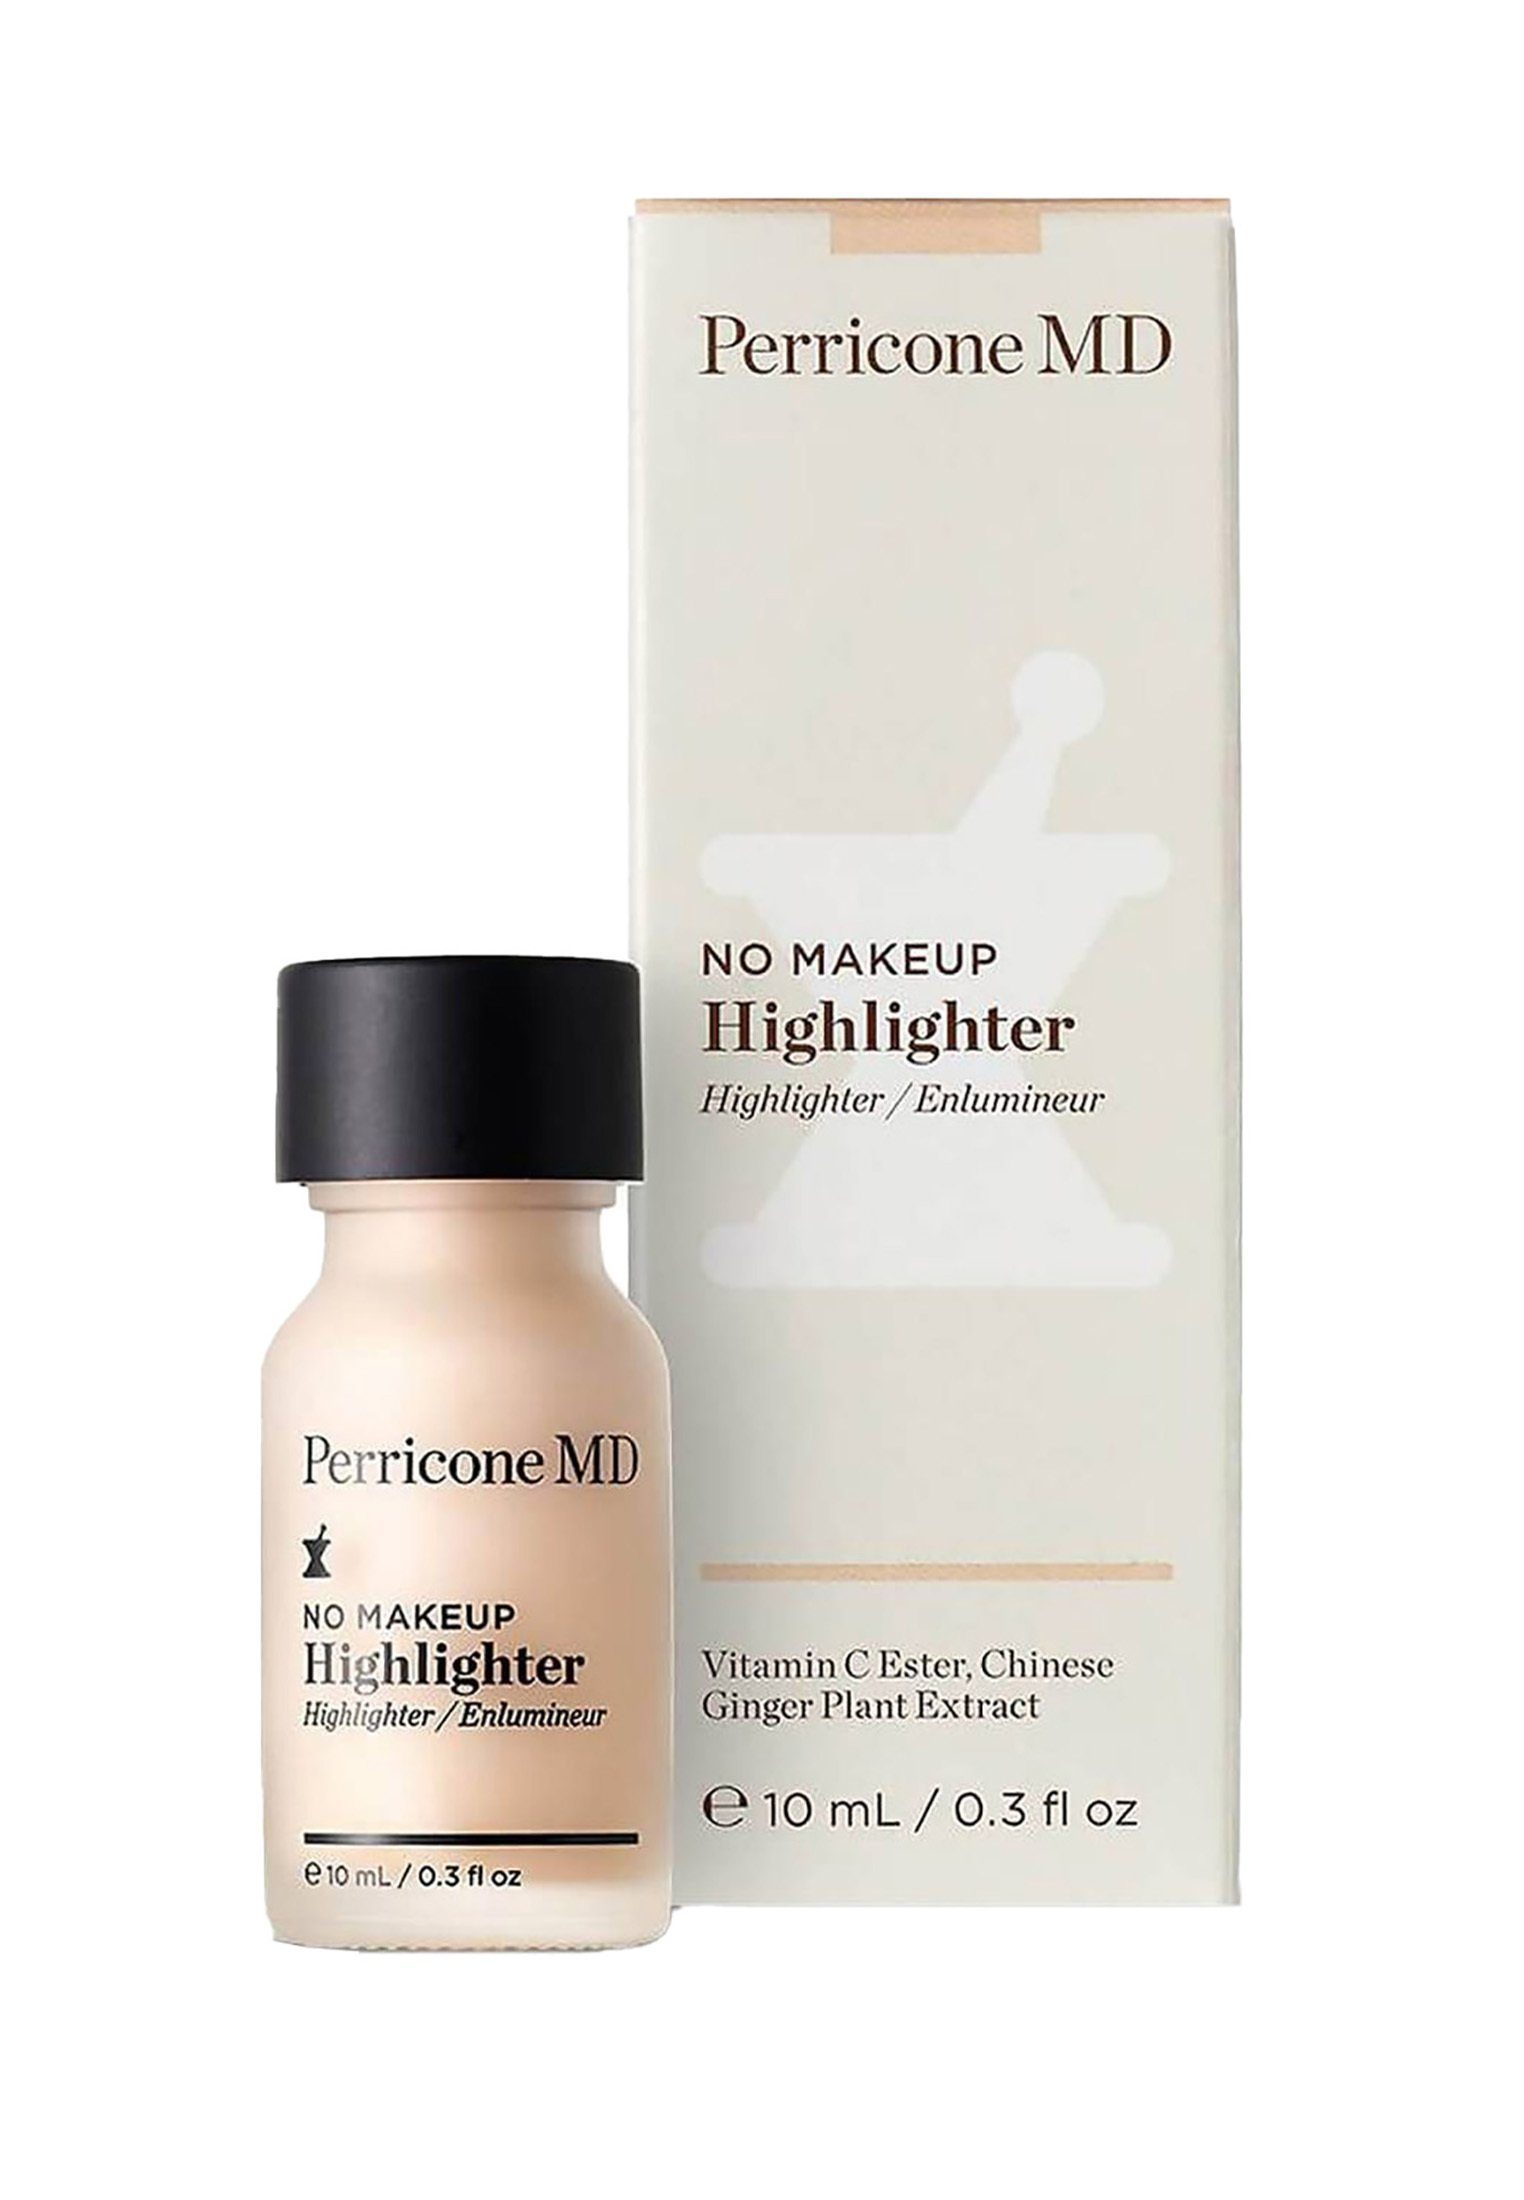 Makeup Highlighter Highlighter Highlighter PERRICONE No PERRICONE